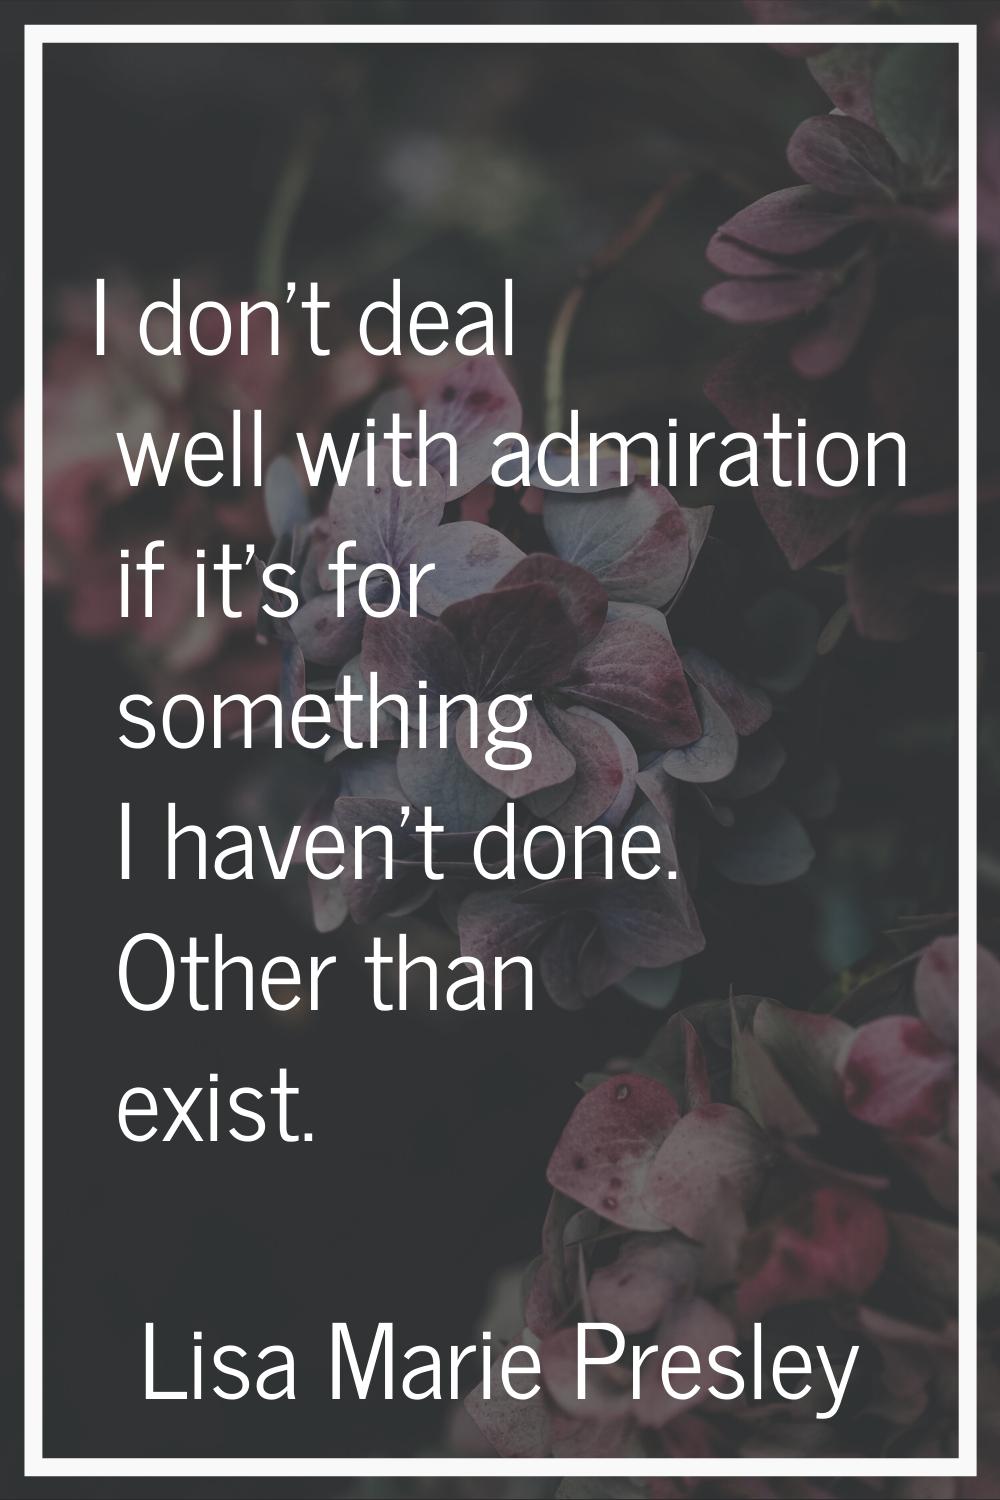 I don't deal well with admiration if it's for something I haven't done. Other than exist.